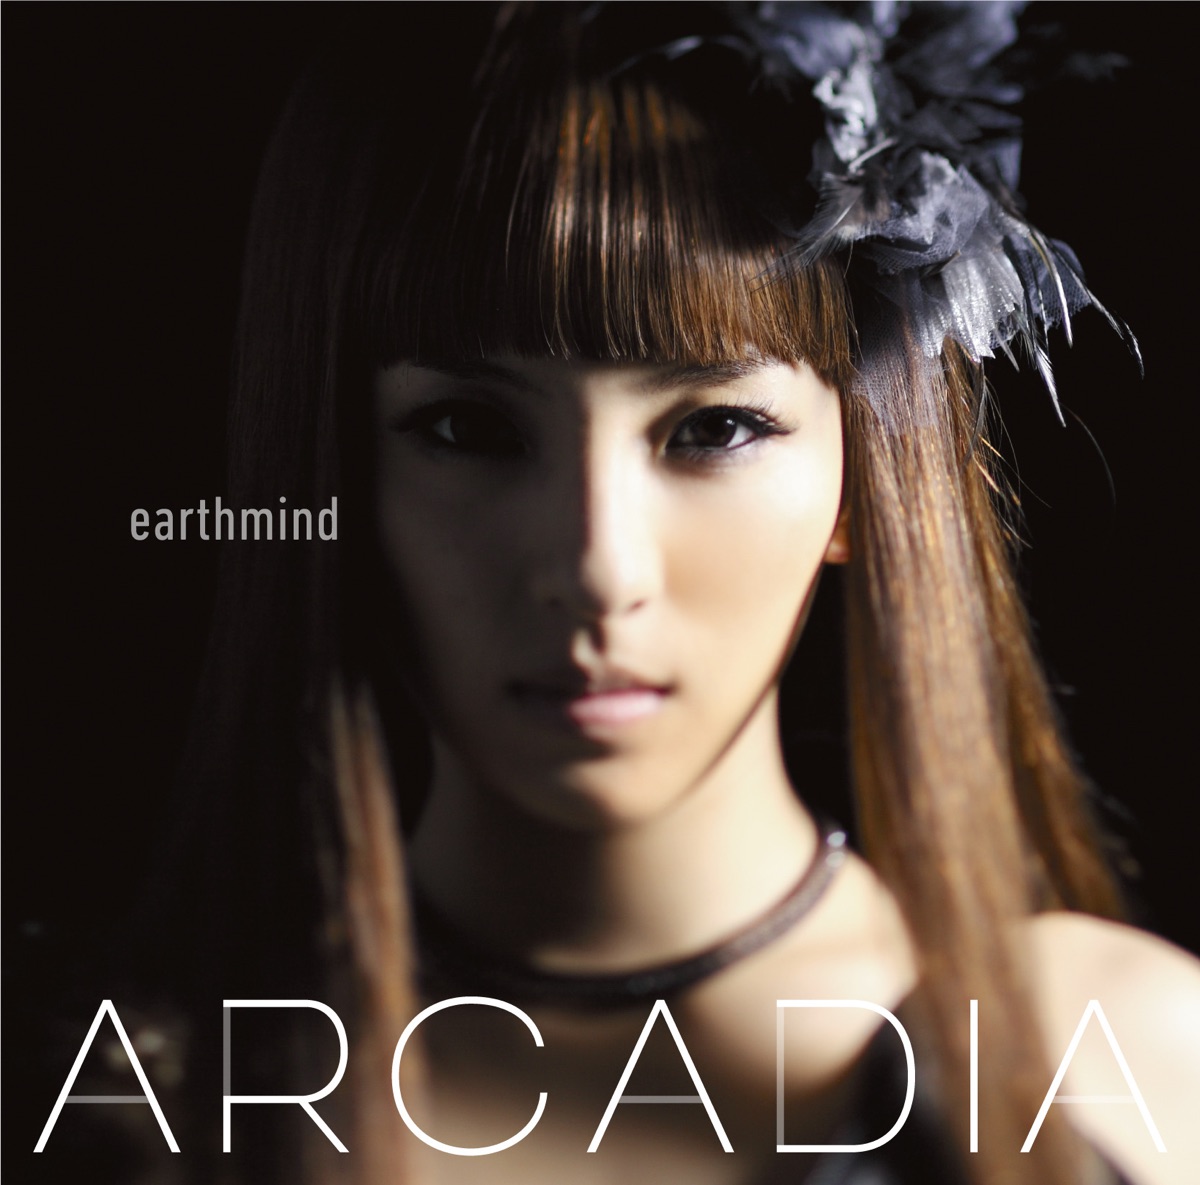 Cover for『earthmind - Another Heaven』from the release『ARCADIA』